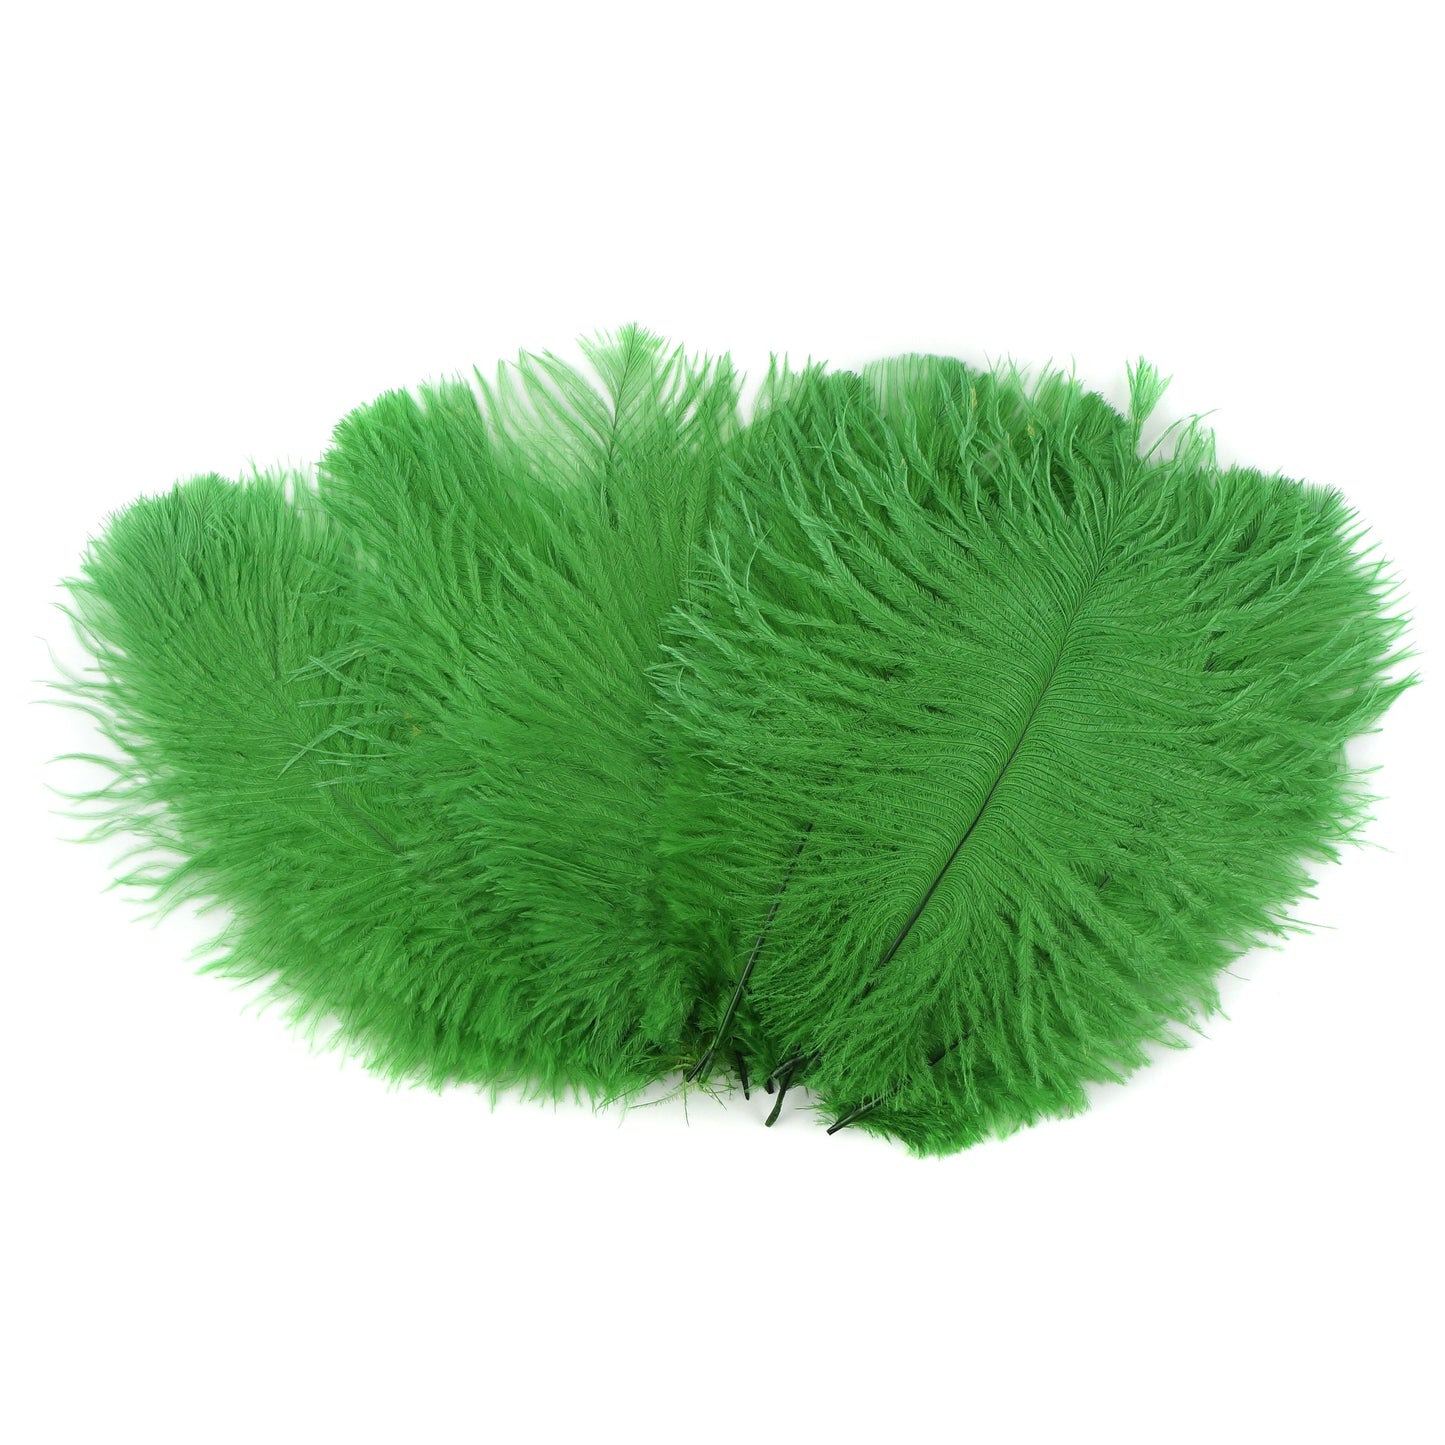 Ostrich Feathers 4-8" Drabs - Kelly